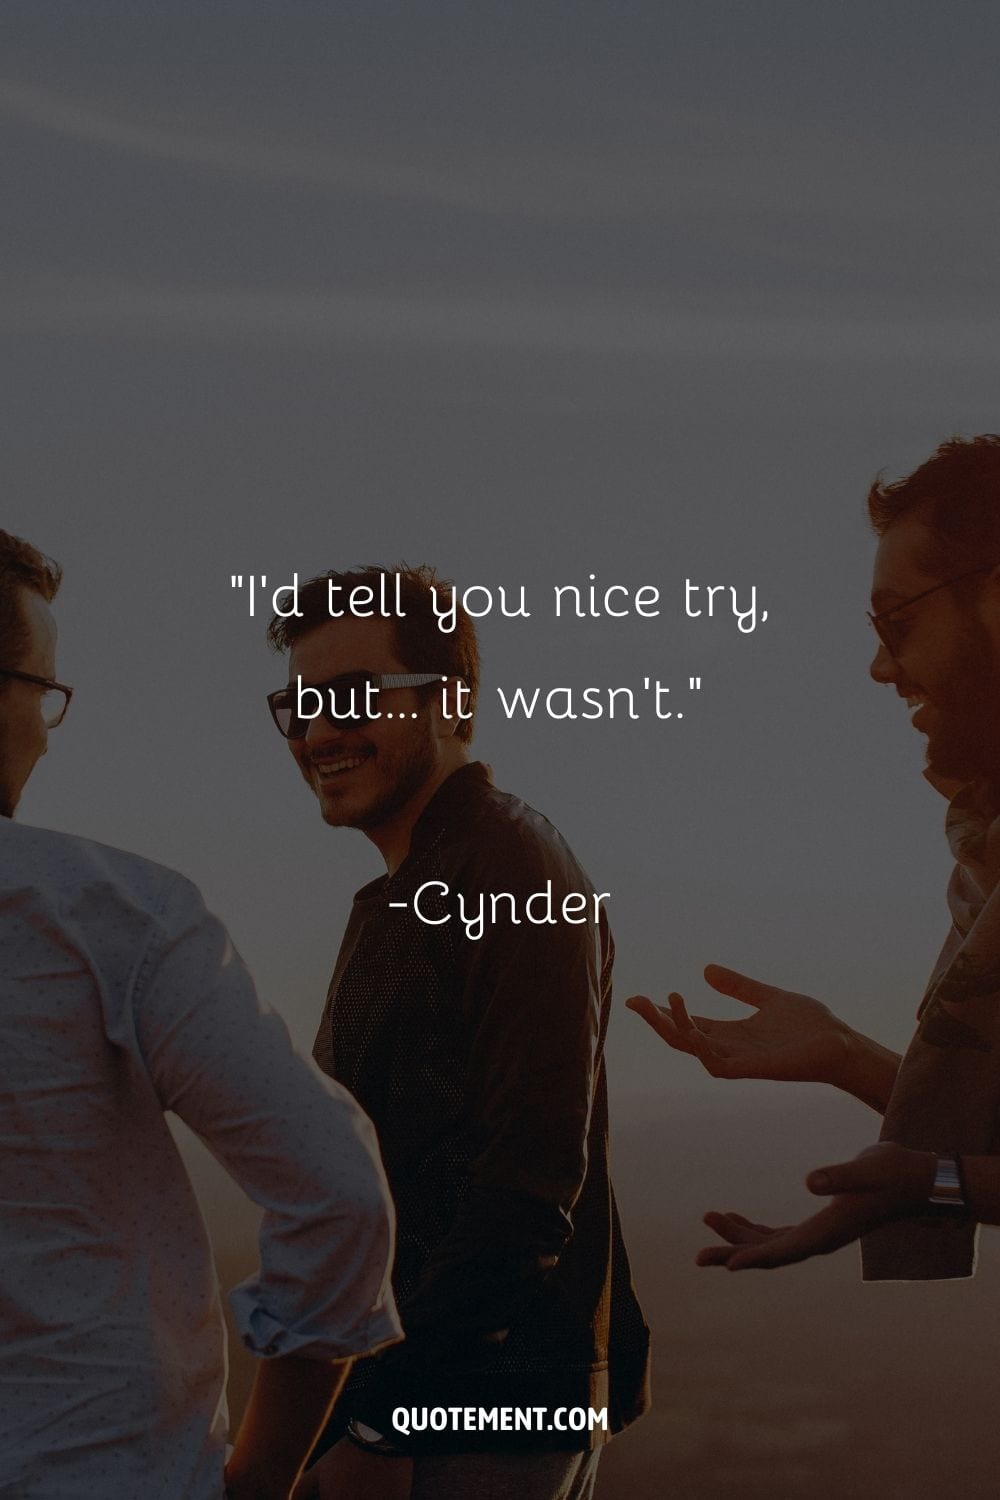 “I'd tell﻿ you nice try, but... it wasn't.” ― Cynder